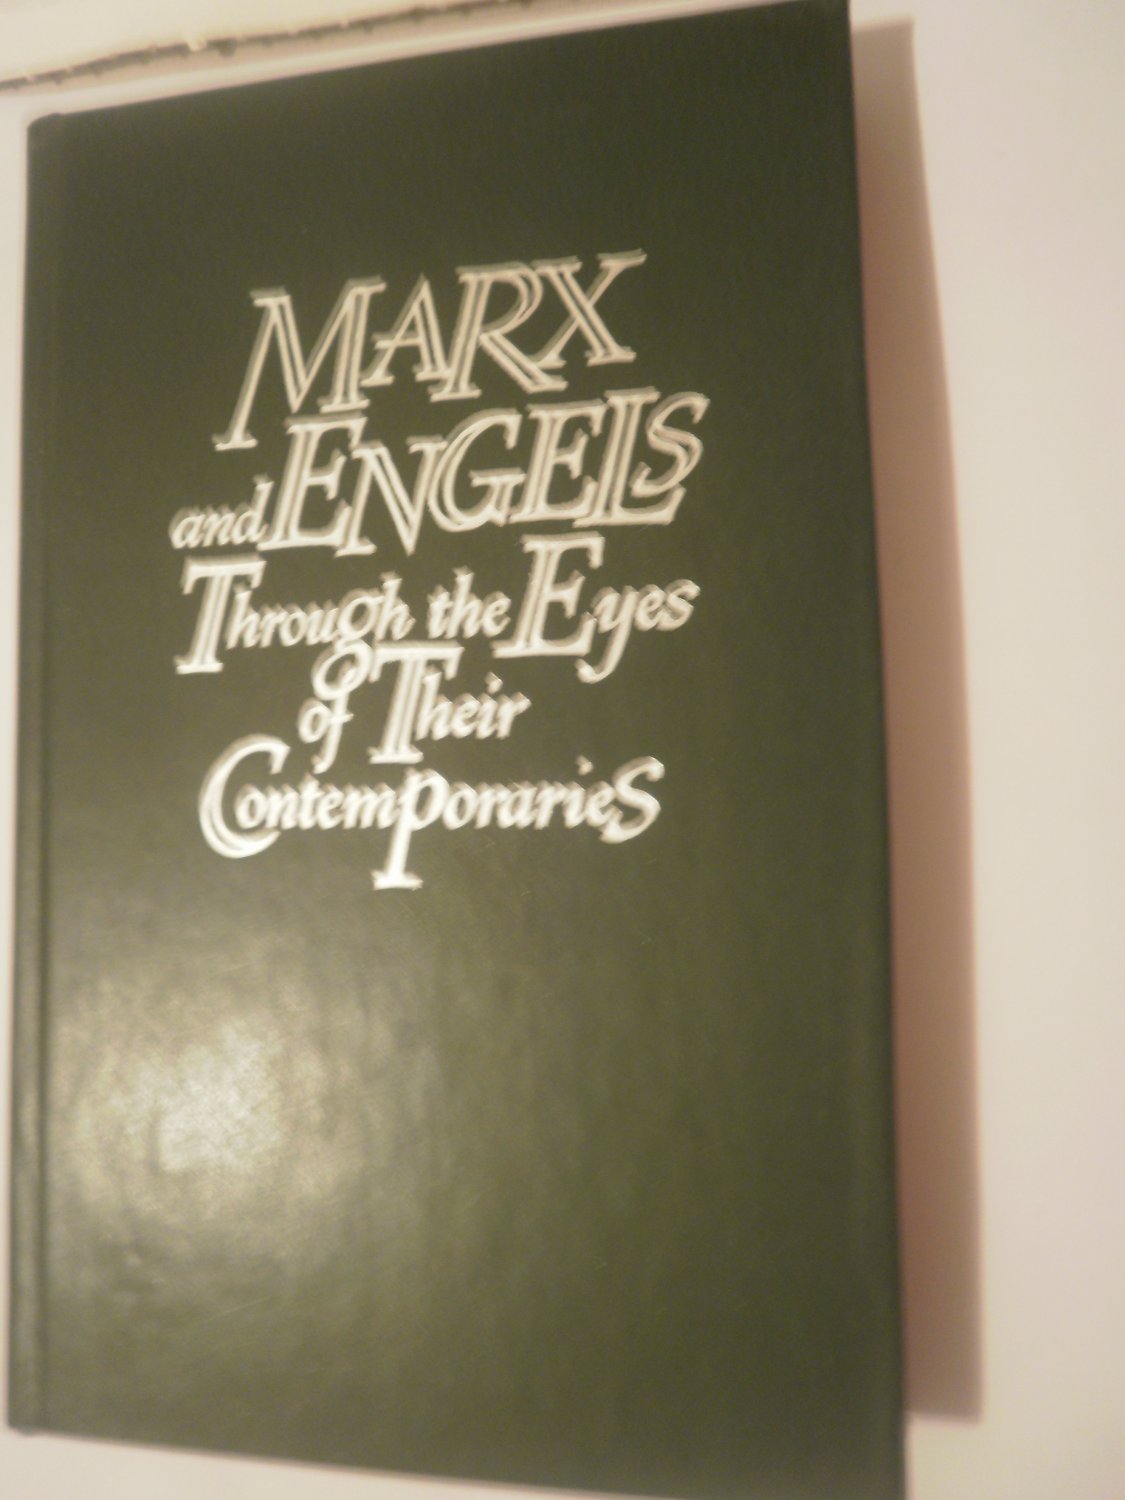 Marx & Engels through the eyes of their contemporaries